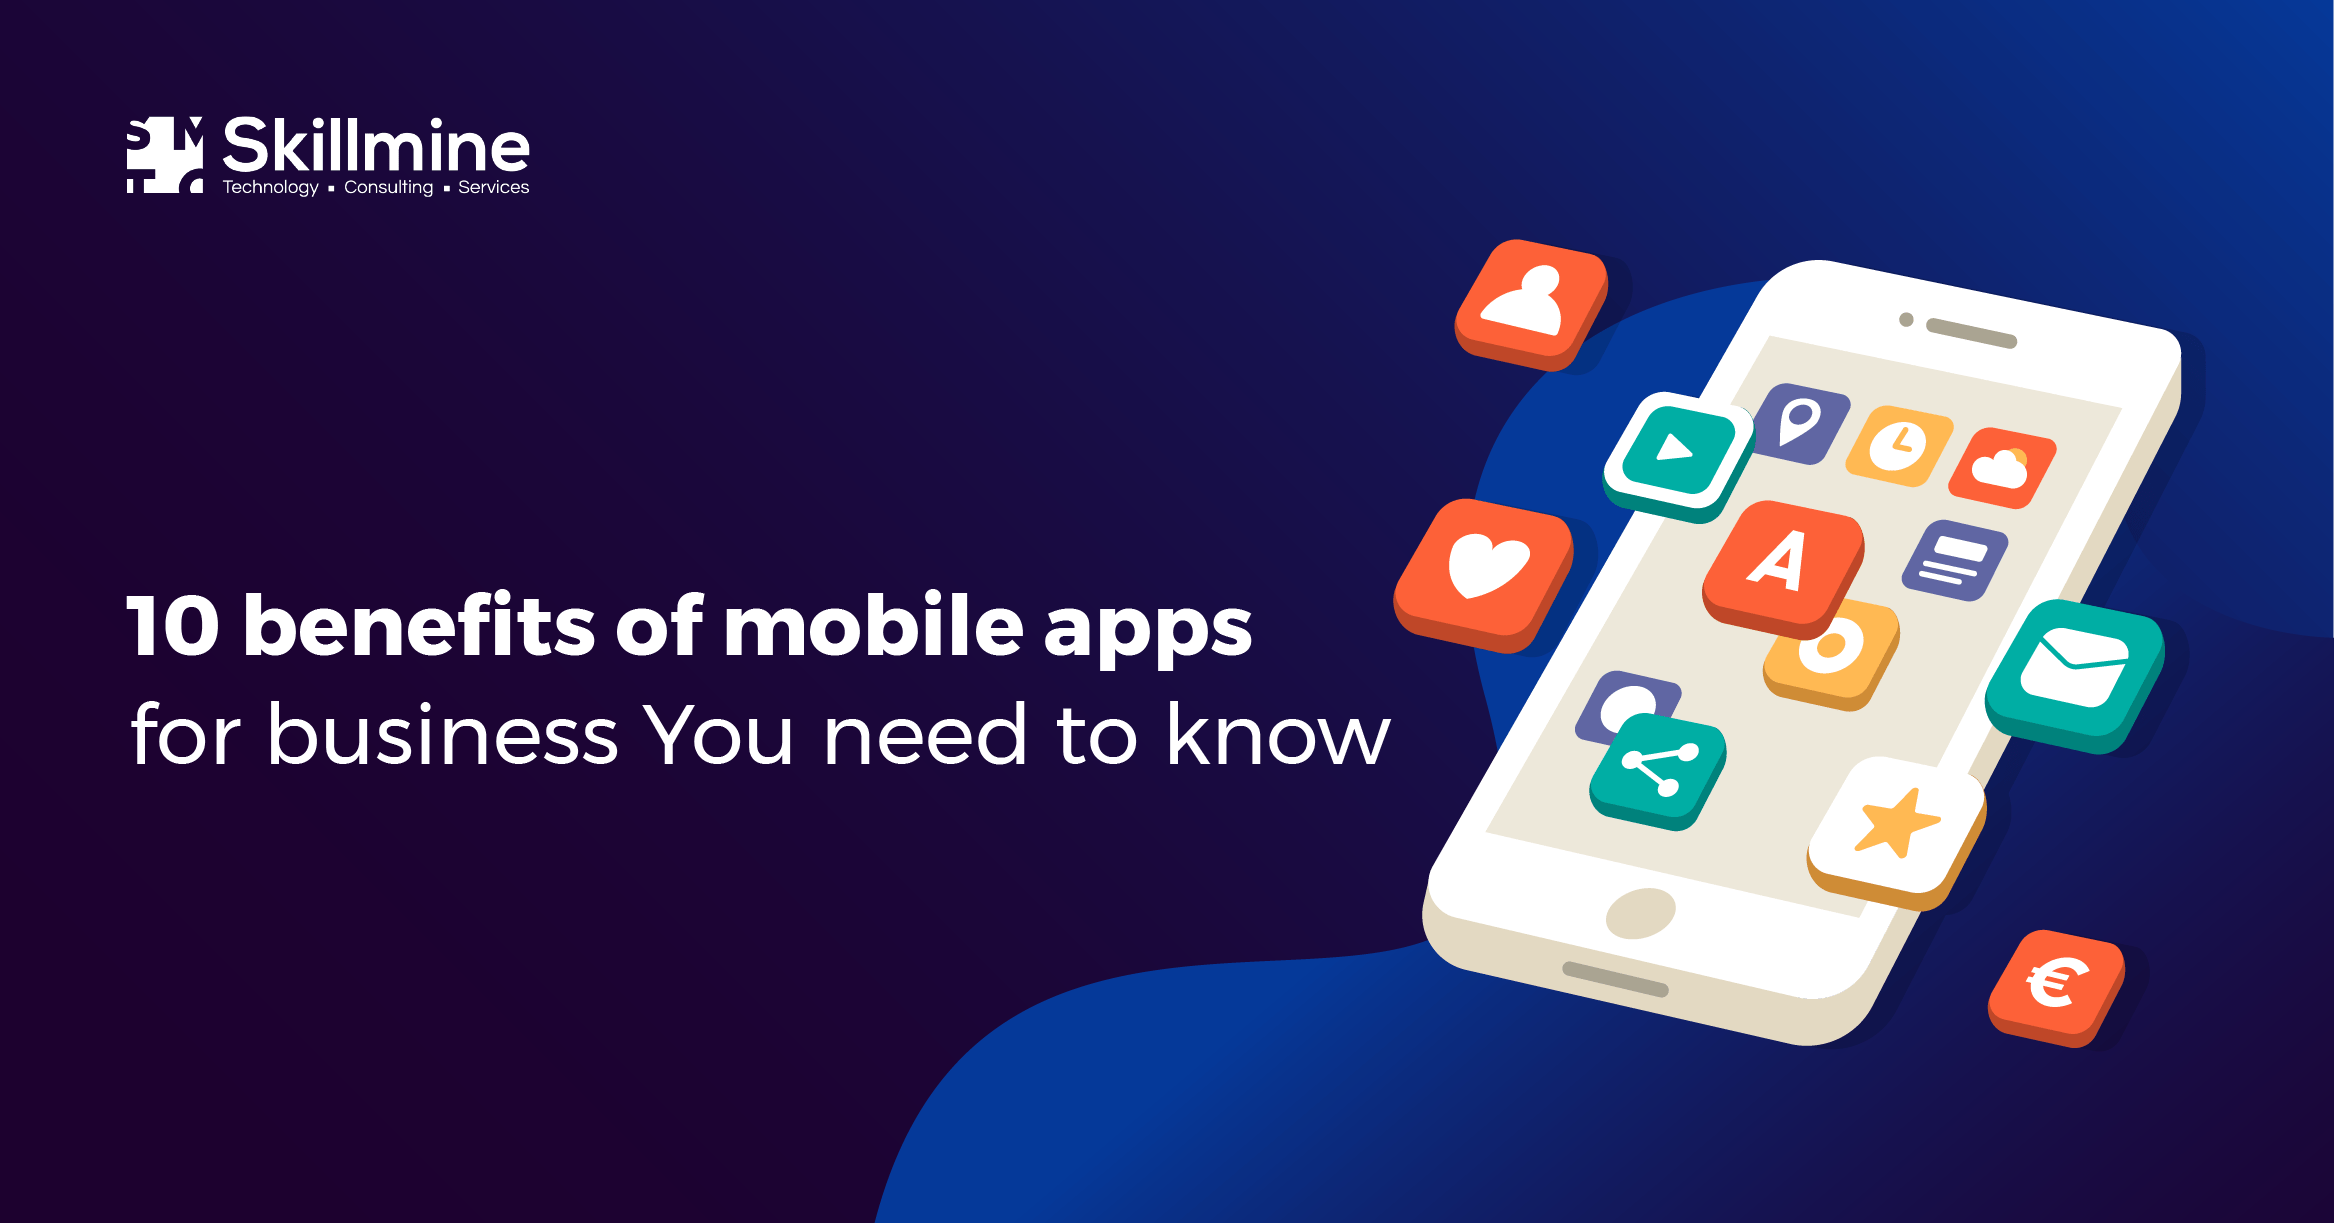 10 benefits of mobile apps for business You need to know